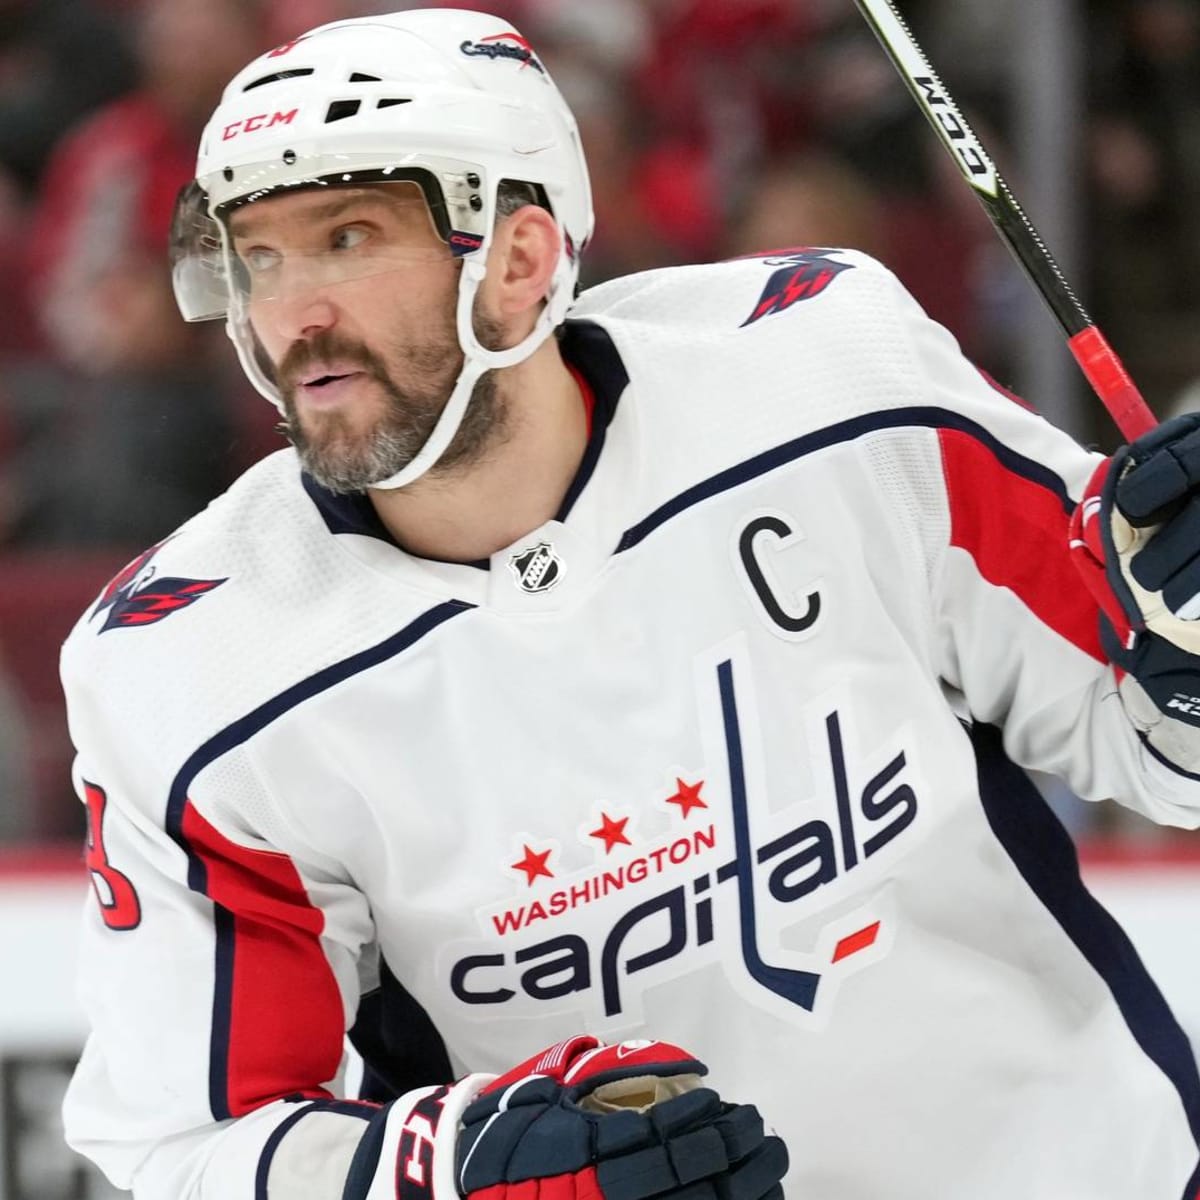 CapitalsPR on X: Alex Ovechkin has been named captain of the Metropolitan  Division for the 2022 NHL All-Star Game. It marks Ovechkin's  franchise-record 12th All-Star Game selection. He has been named captain